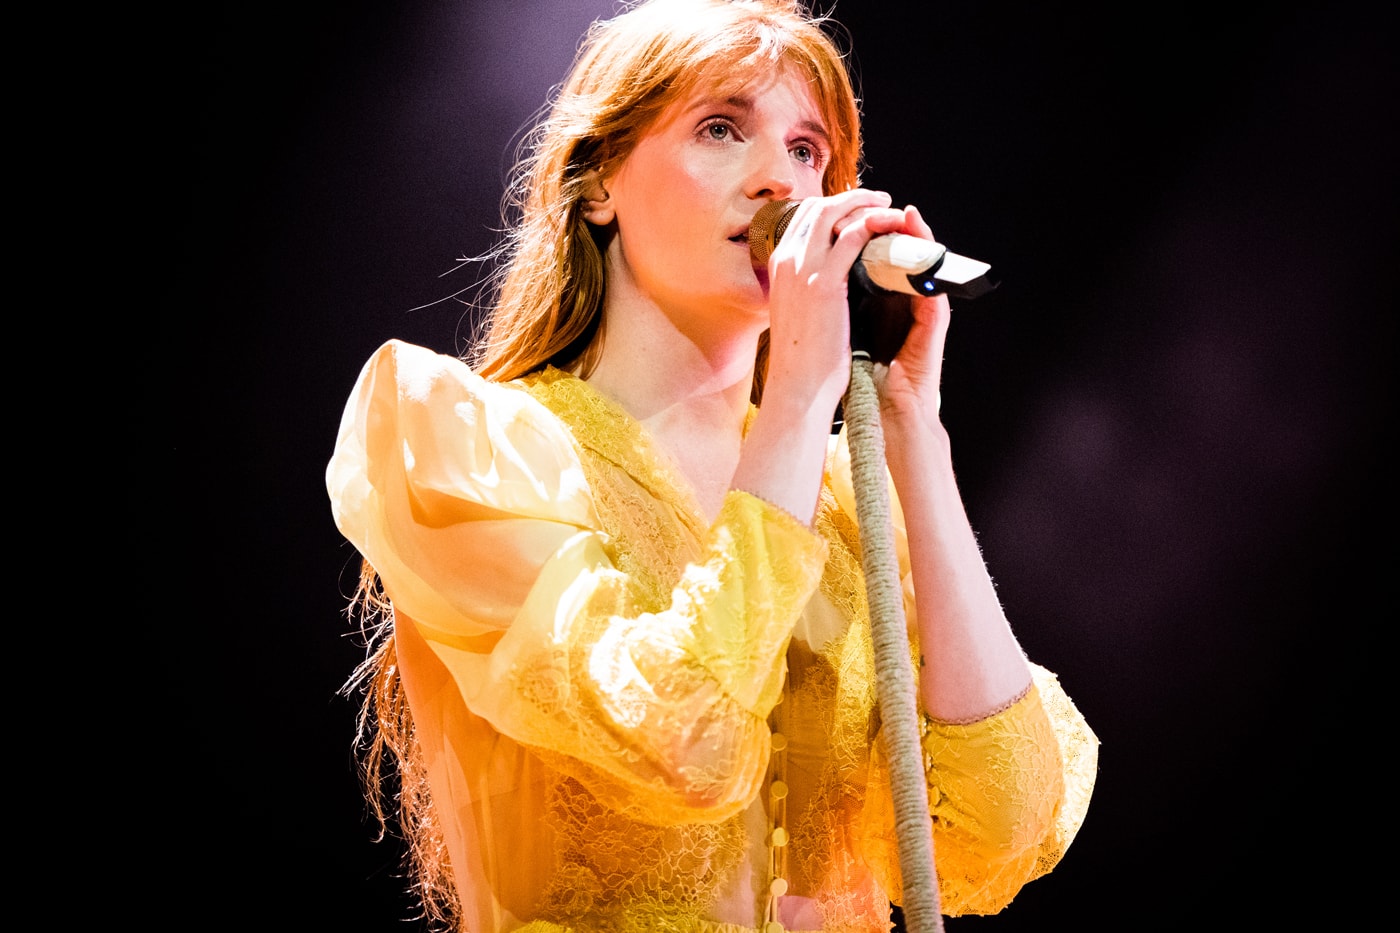 Florence and The Machine Cover Fleetwood Mac, "Silver Springs"